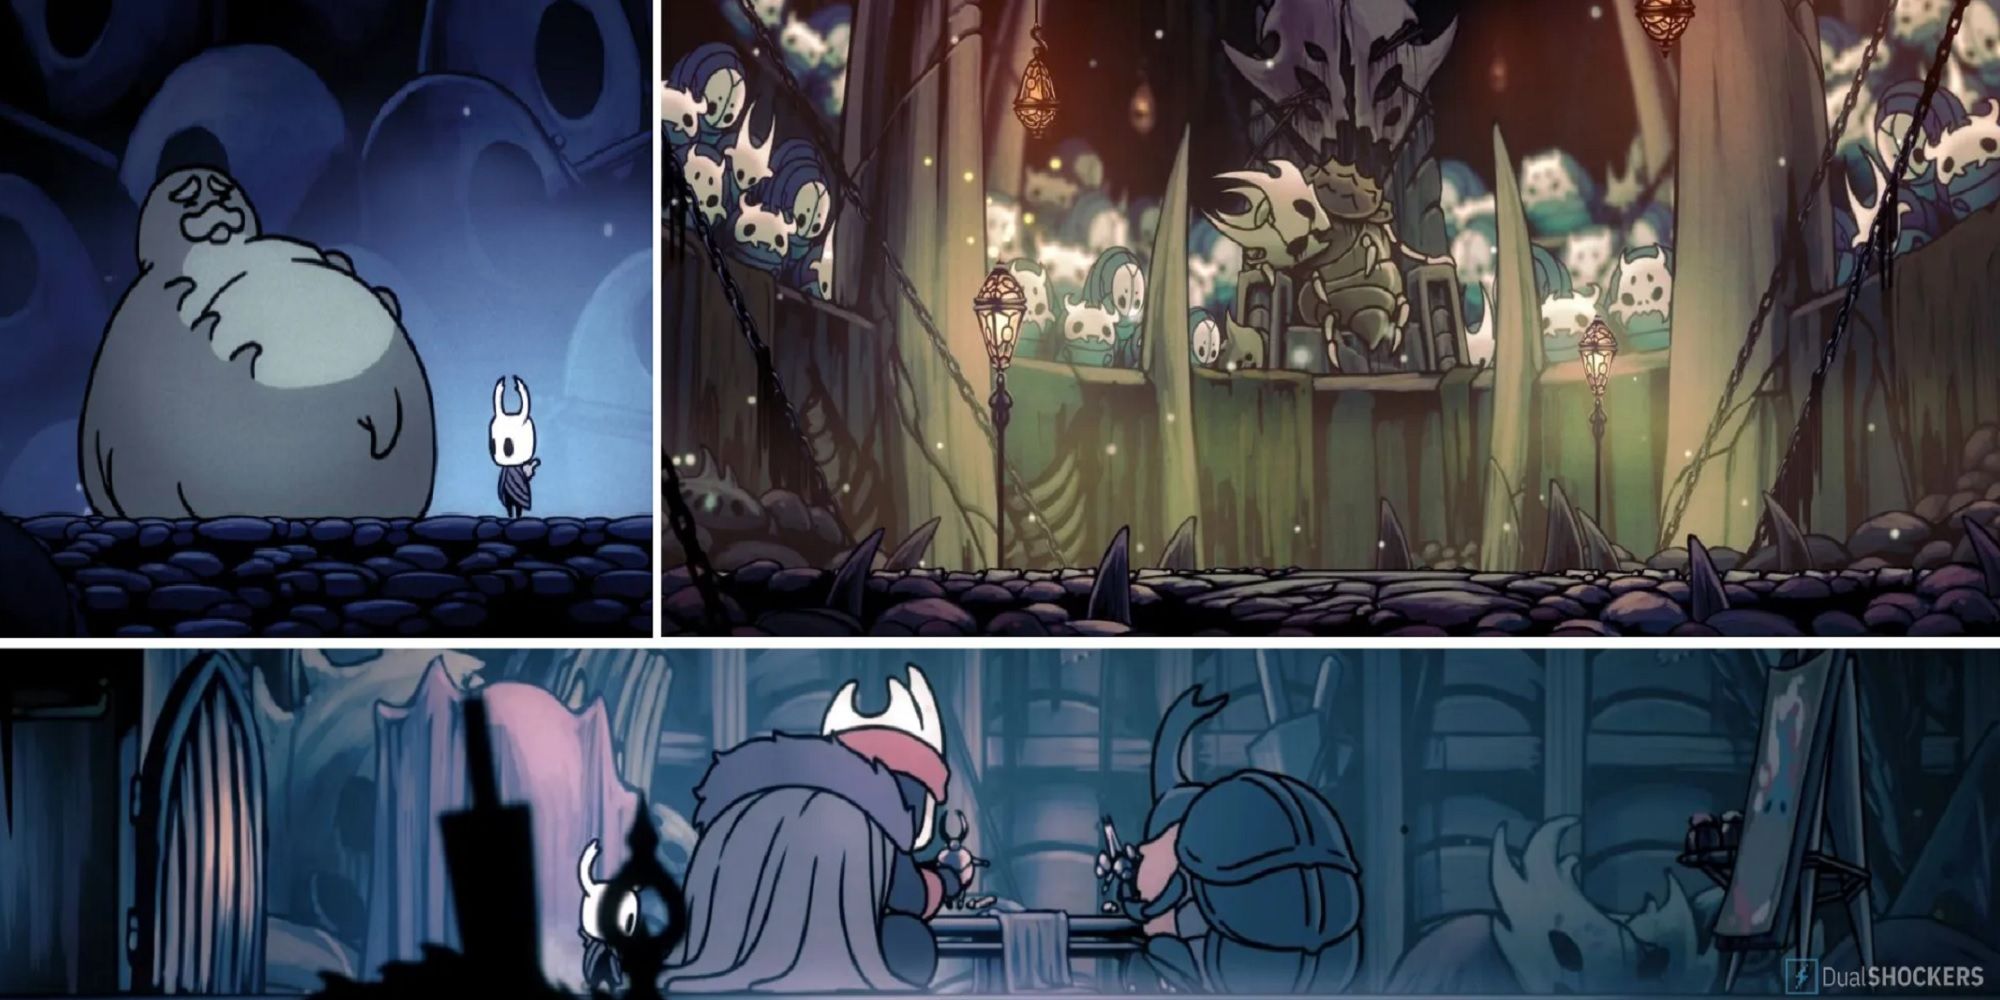 Hollow Knight split image the Grubfather's home, the Colosseum of Fools, and the Nailsmith with Sheo in his house